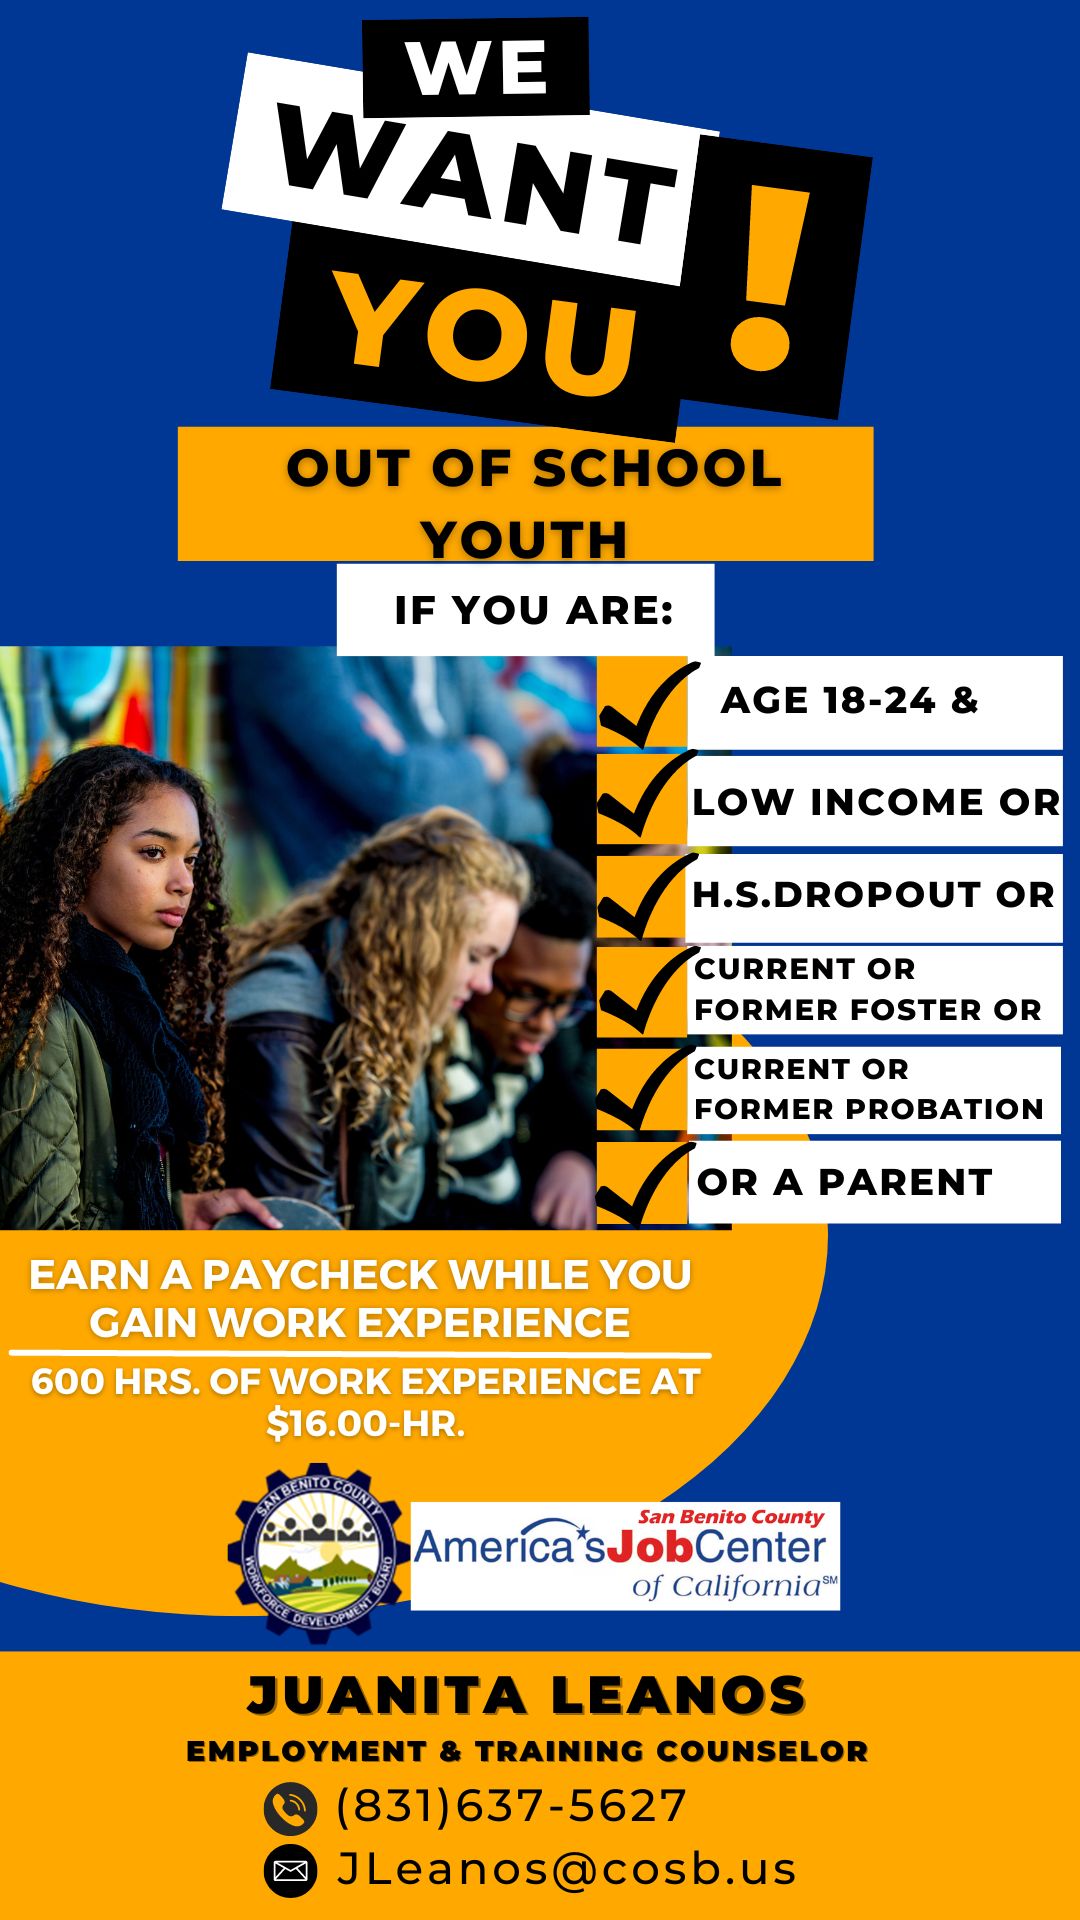 Out of School Youth Program- Taking Applications!